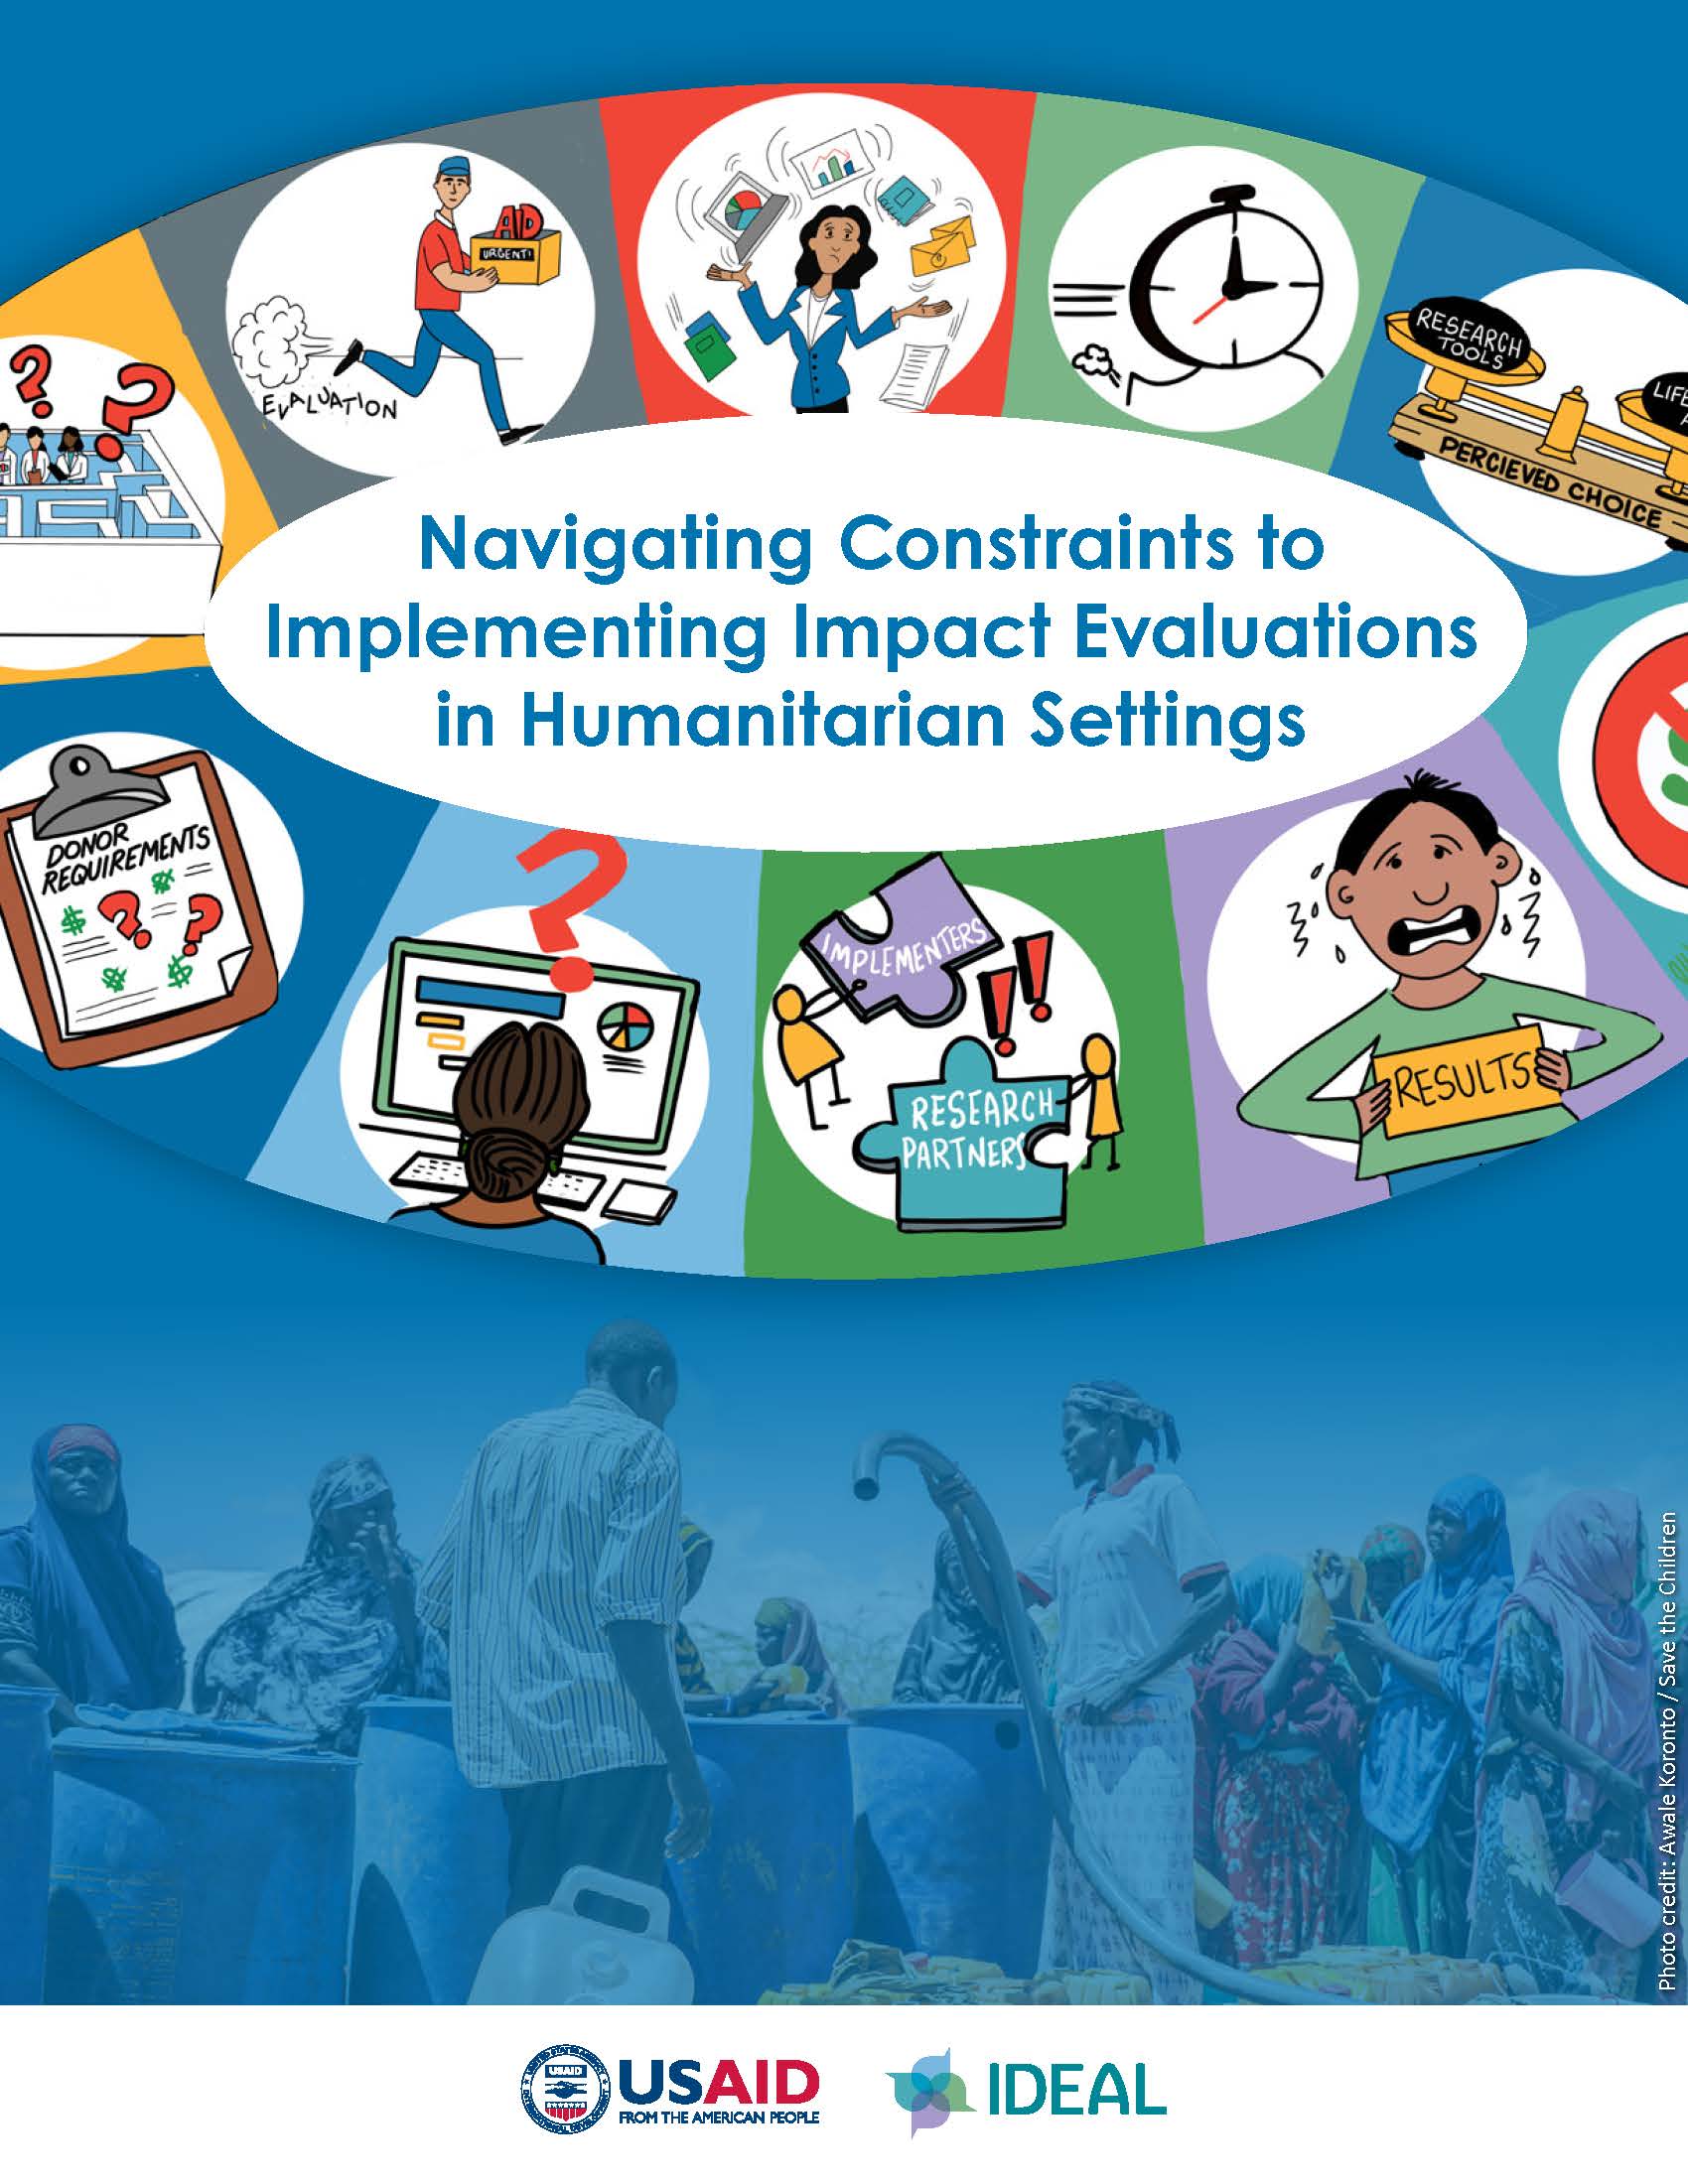 Cover of report shows the title surrounded by graphic illustrations of the ten constraints, overlaying an image of people collecting water 